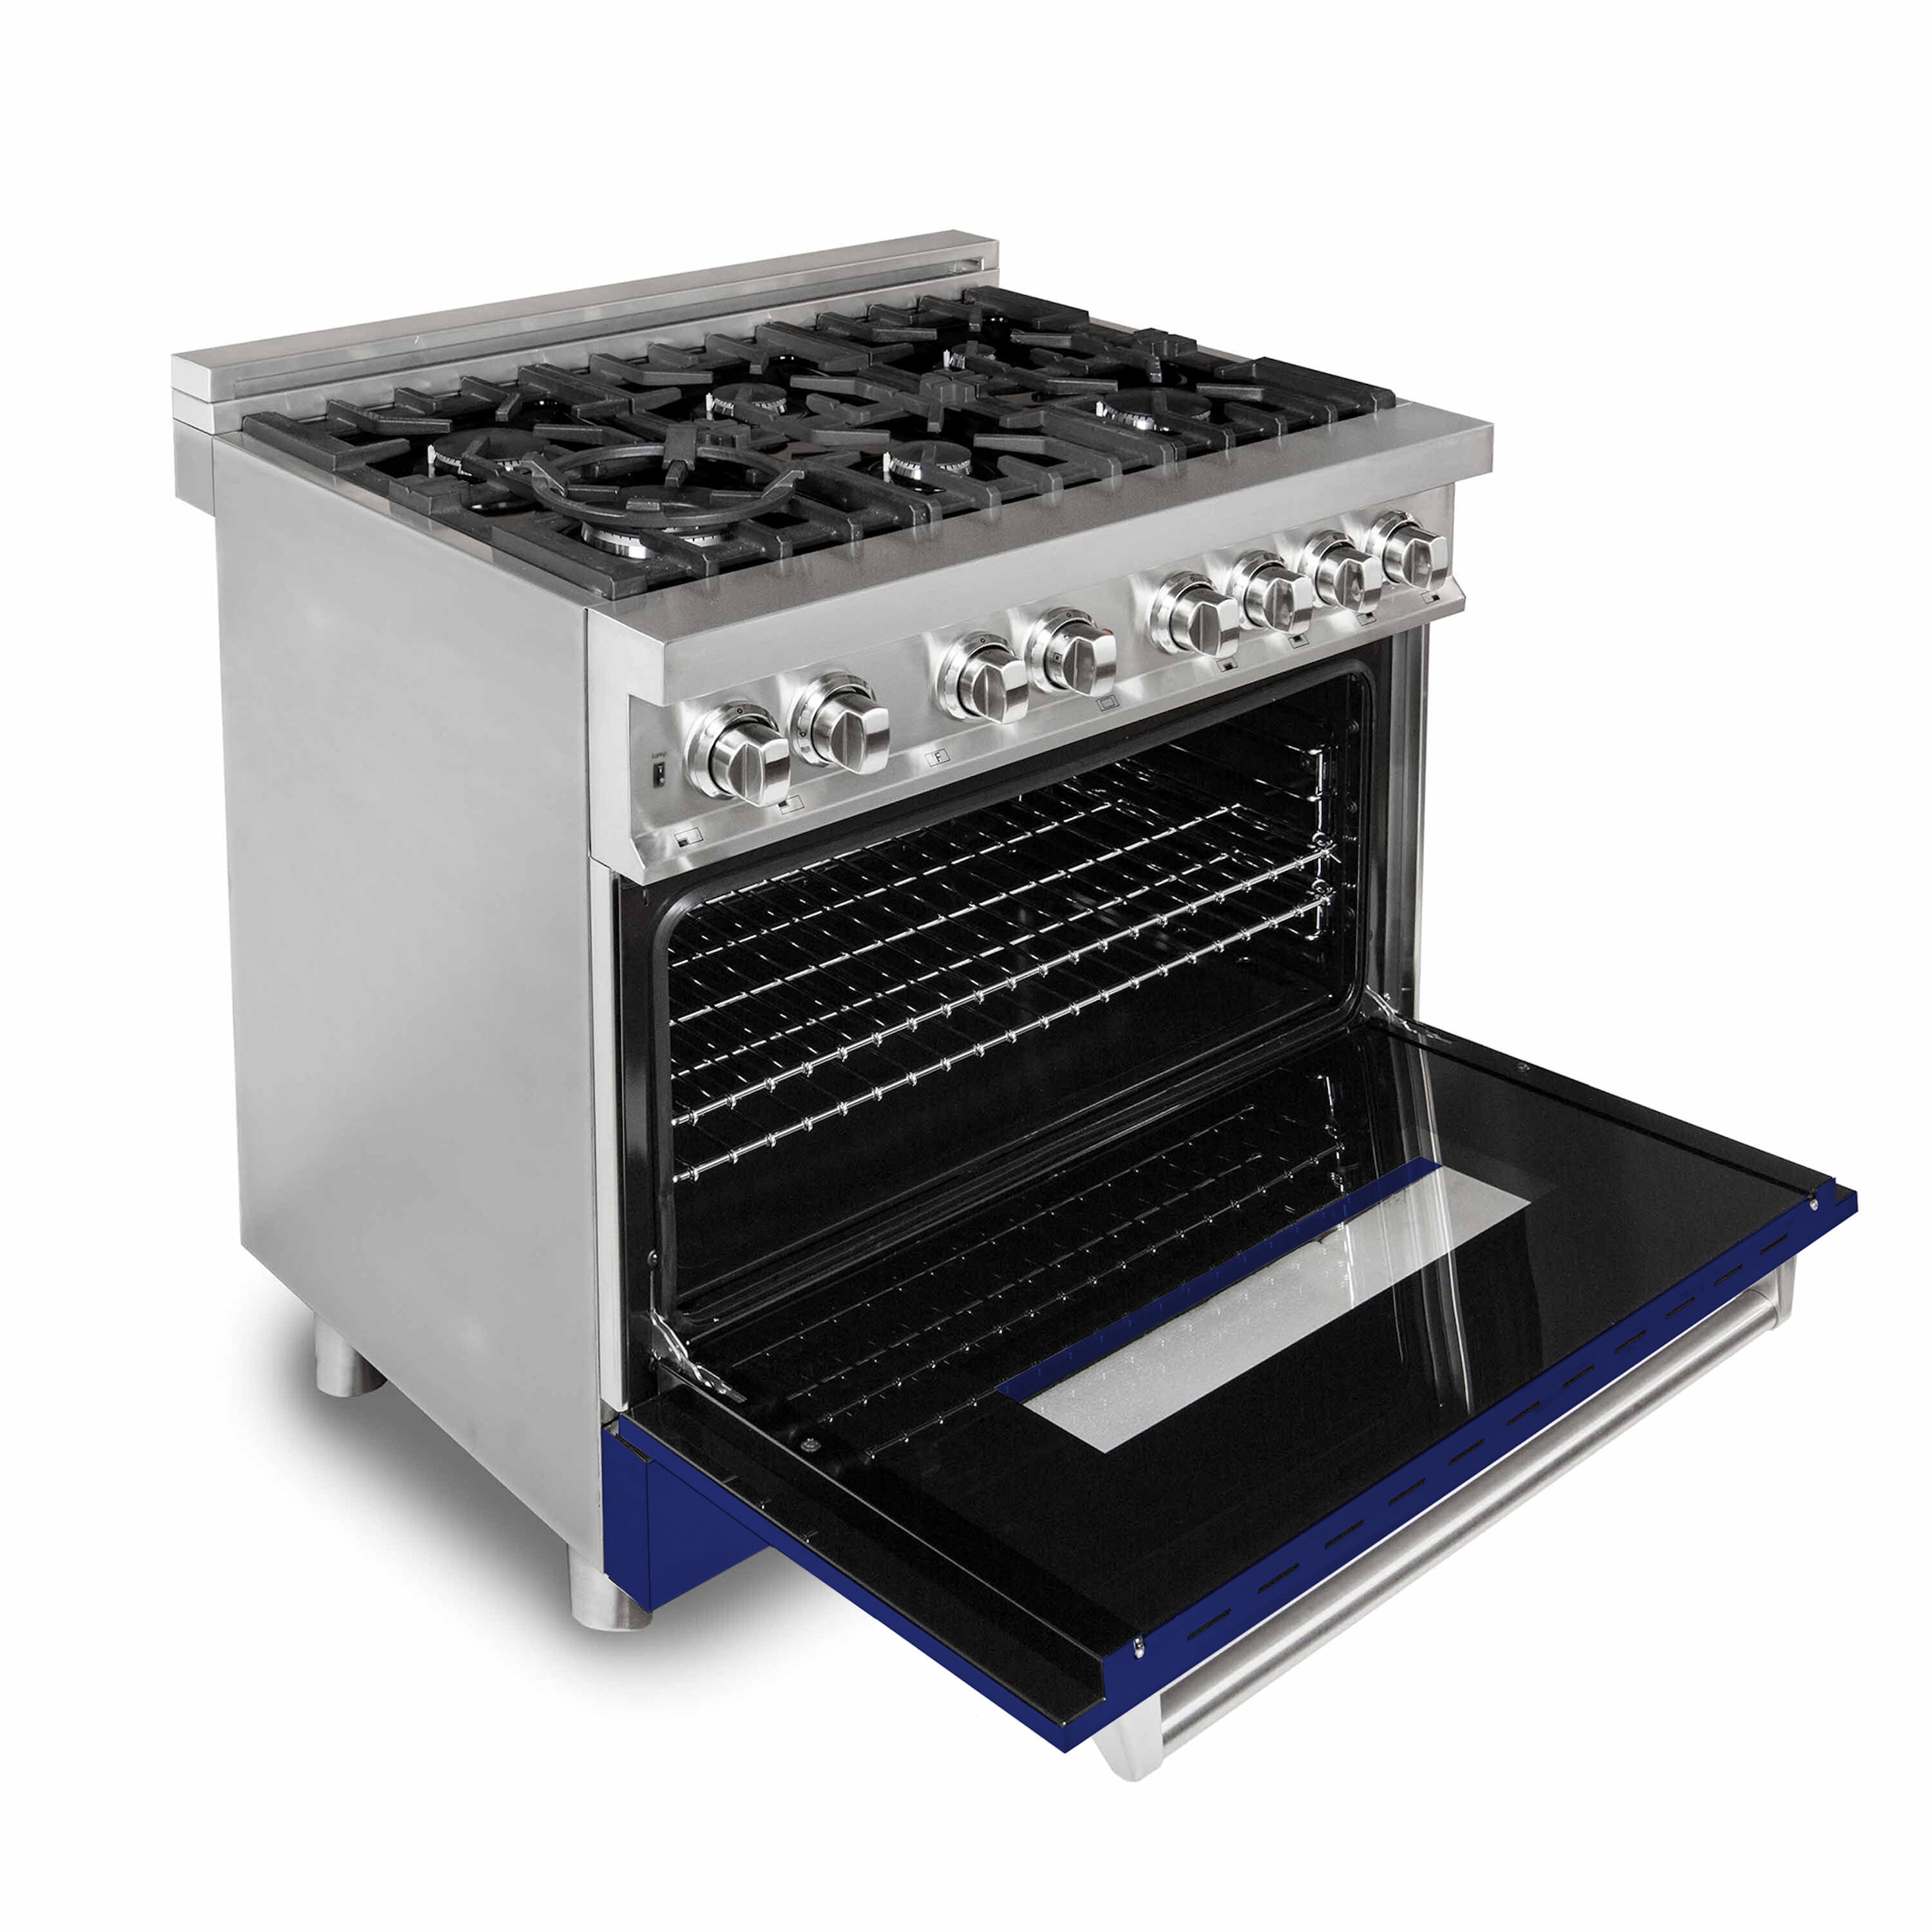 Vertical 6 burners electric stove with oven stainless steel body